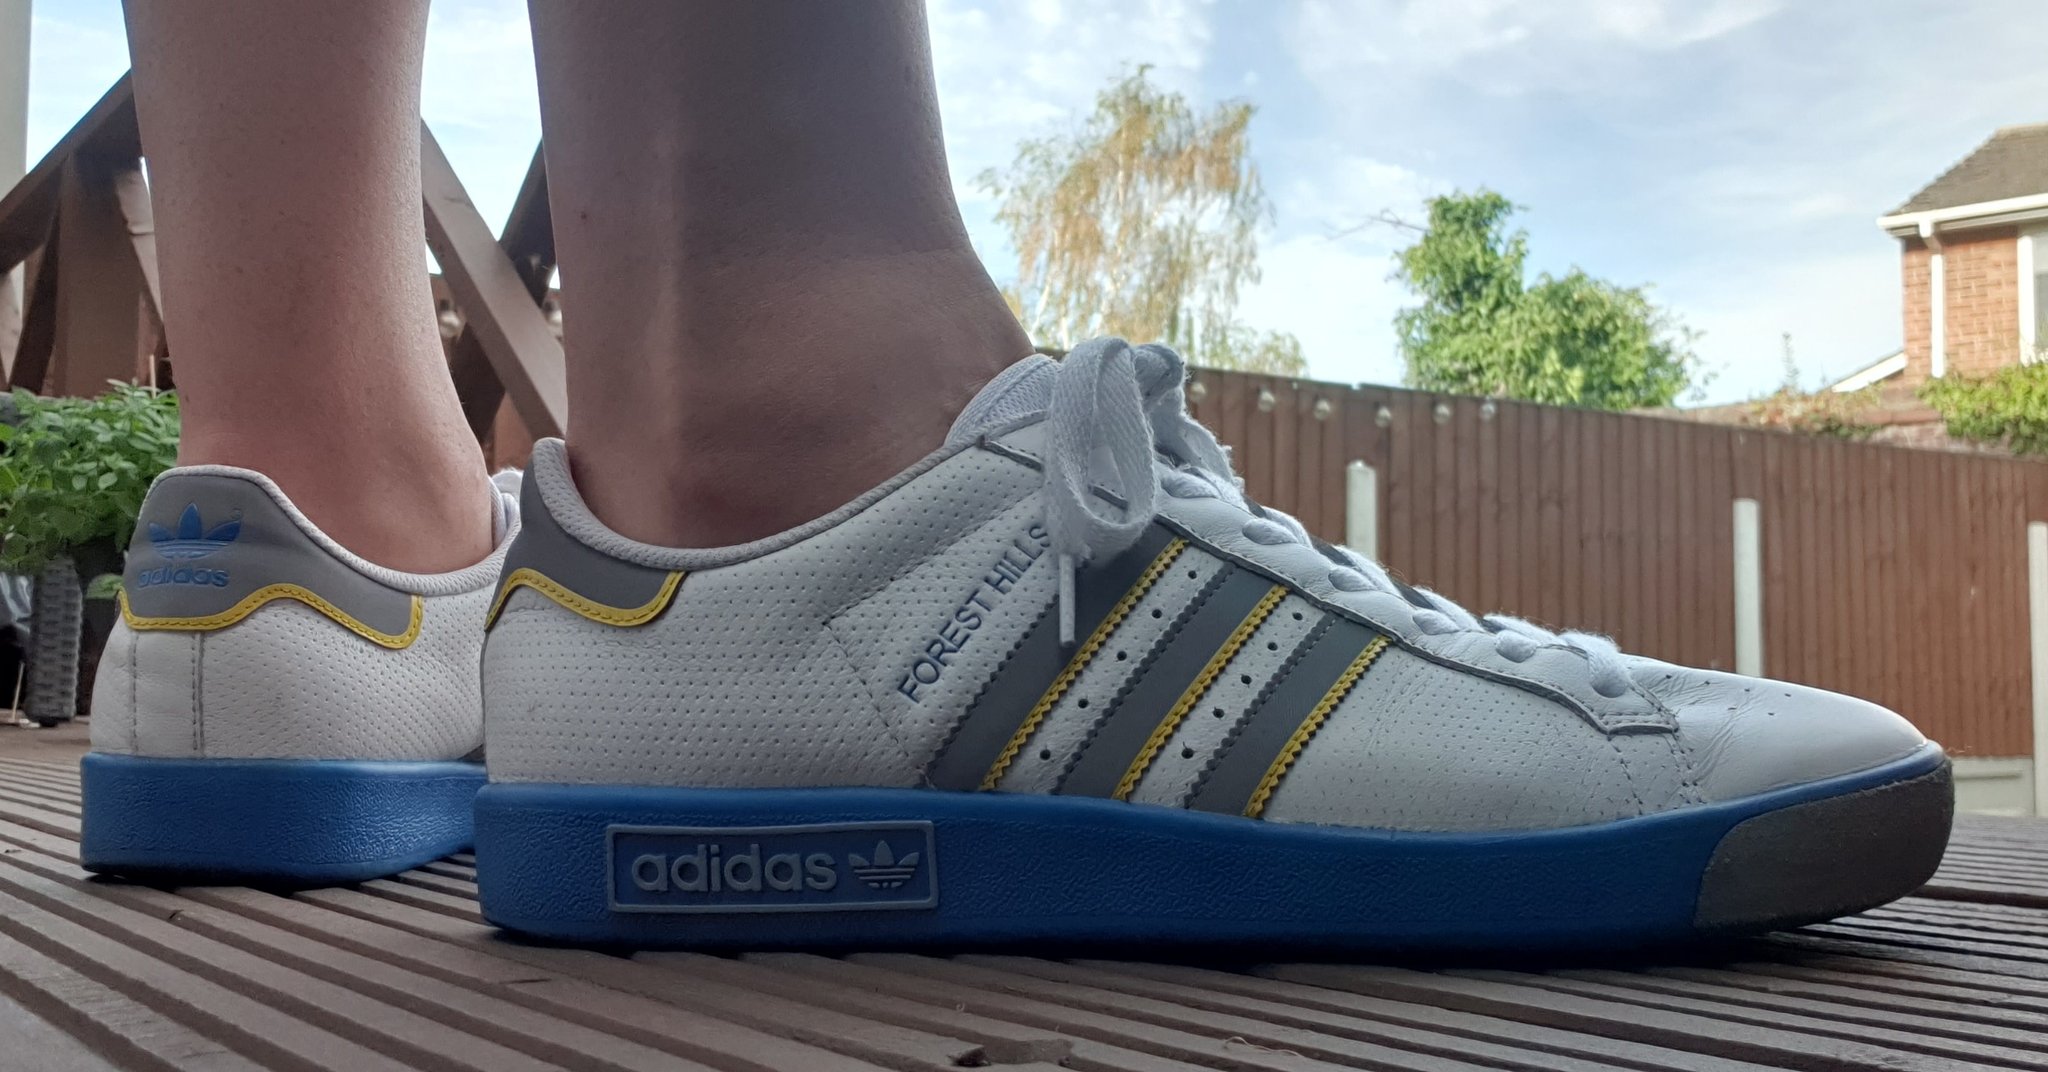 Dominic Powell /// on Twitter: "Adidas Forest Hills Vintage (RUNWHITE/ALUMI2/POOL) Released 2013 . #adidas #adidascollector #adifamily #3stripes2soles1love / Twitter